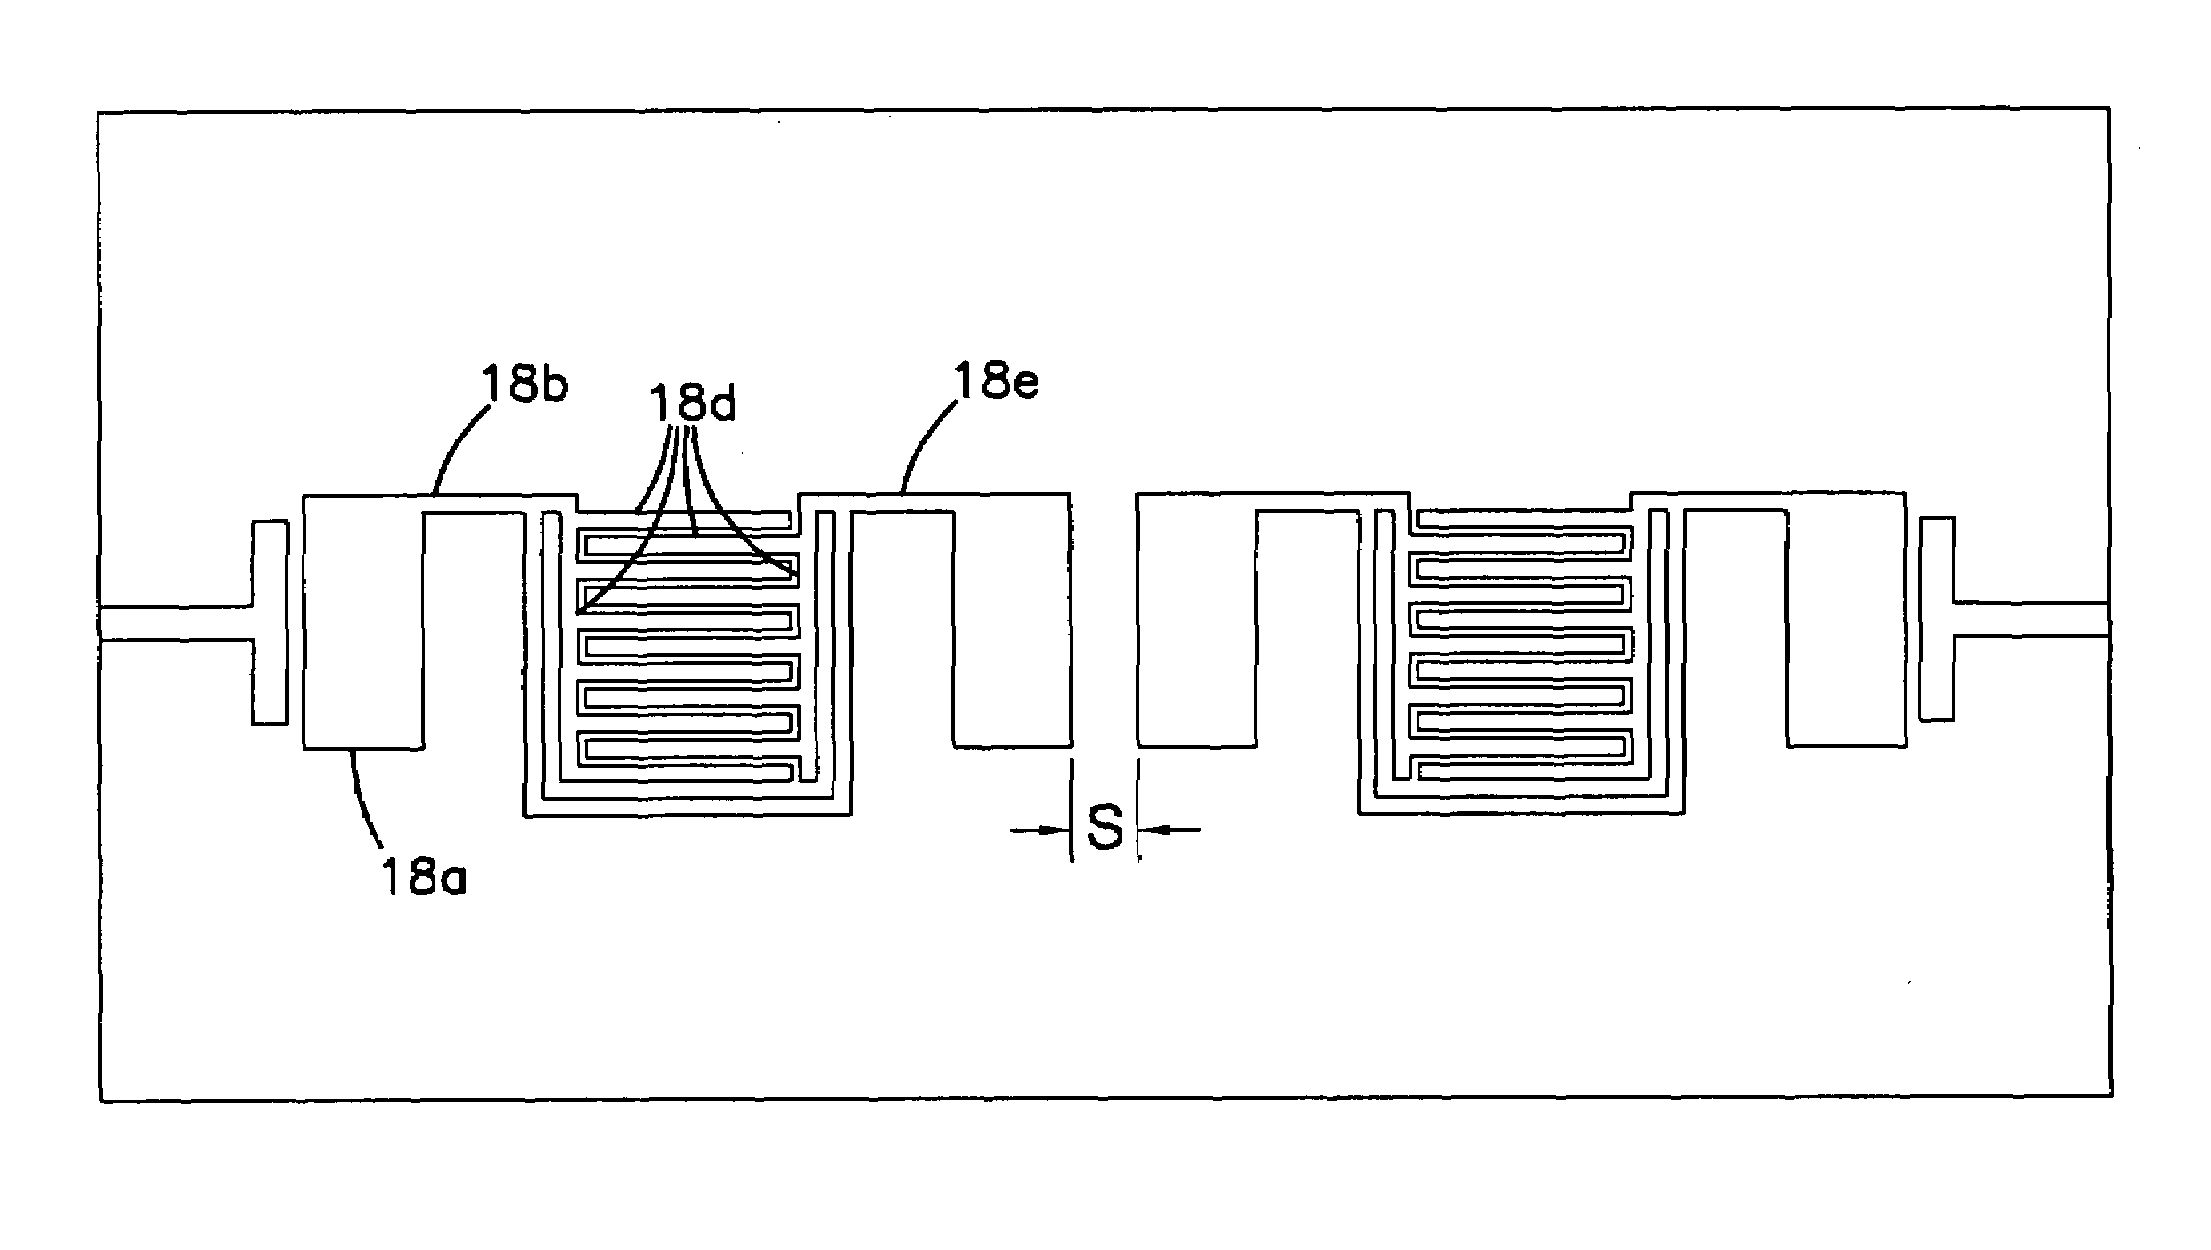 Superconductive filter with capacitive patches providing reduced cross-coupling